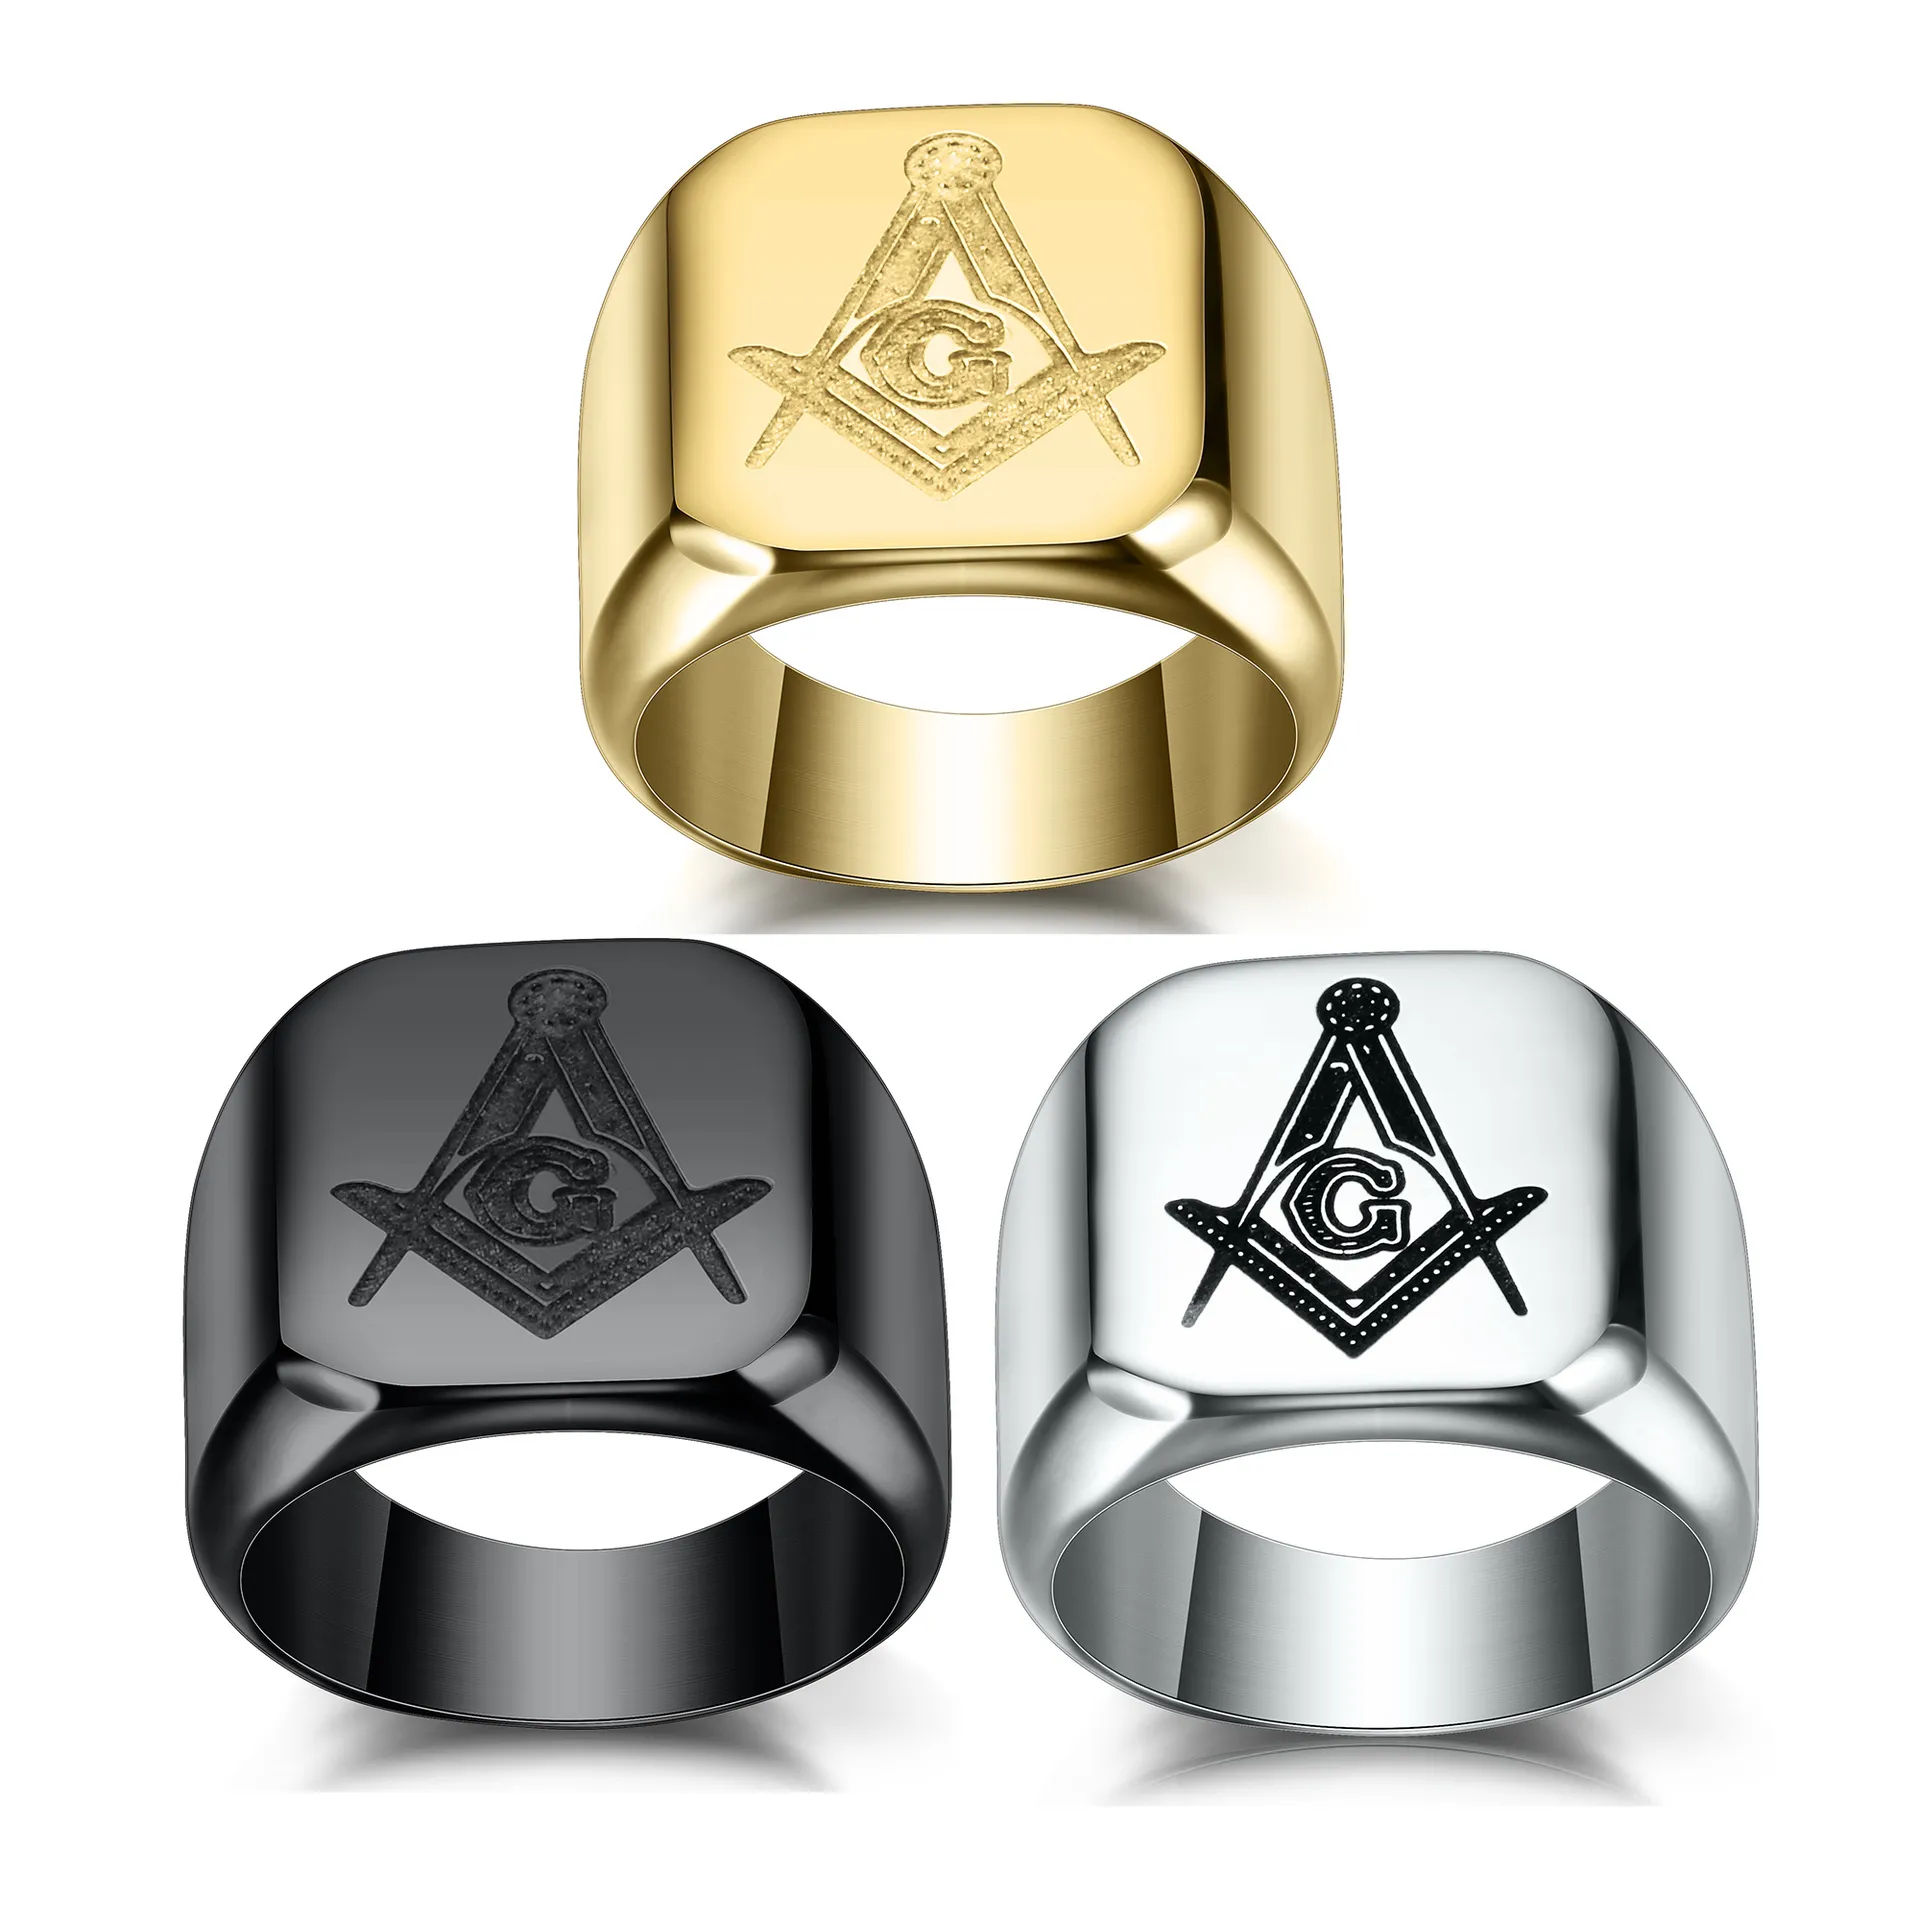 High quality polished gold silver black masonic rings 316 stainless steel men women freemason AG symbol rings jewelry wholesale items